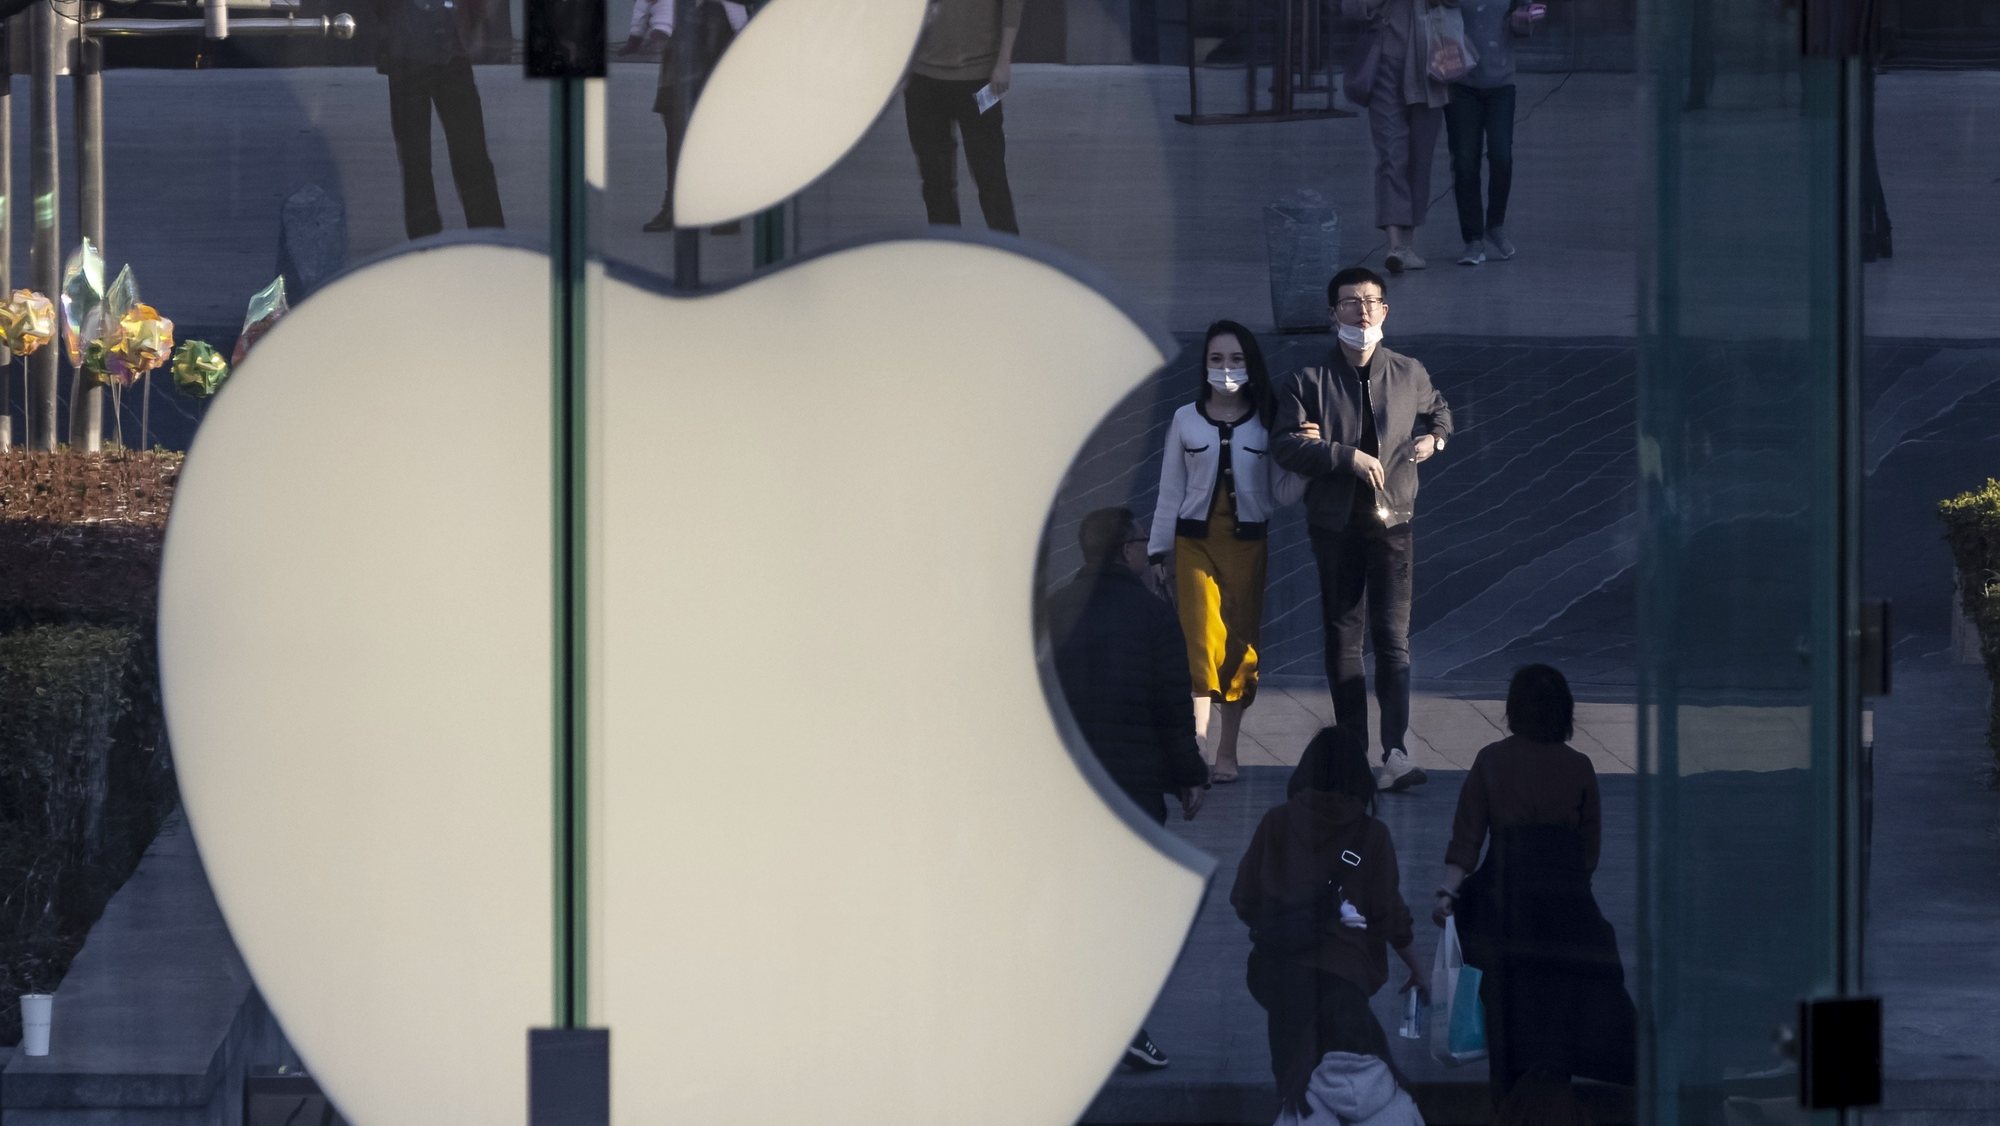 epa09027457 People walk next to the Apple logo in the  financial district of Shanghai, China, 21 February 2021. Provinces in China have set the growth targets to be over 6.5 per cent for 2021 before the annual session of the National People&#039;s Congress set for 04 March in Beijing. China&#039;s economy grew 2.3 per cent in 2020 despite the COVID-19 pandemic, according to data from the National Bureau that was released in January 2021.  EPA/ALEX PLAVEVSKI